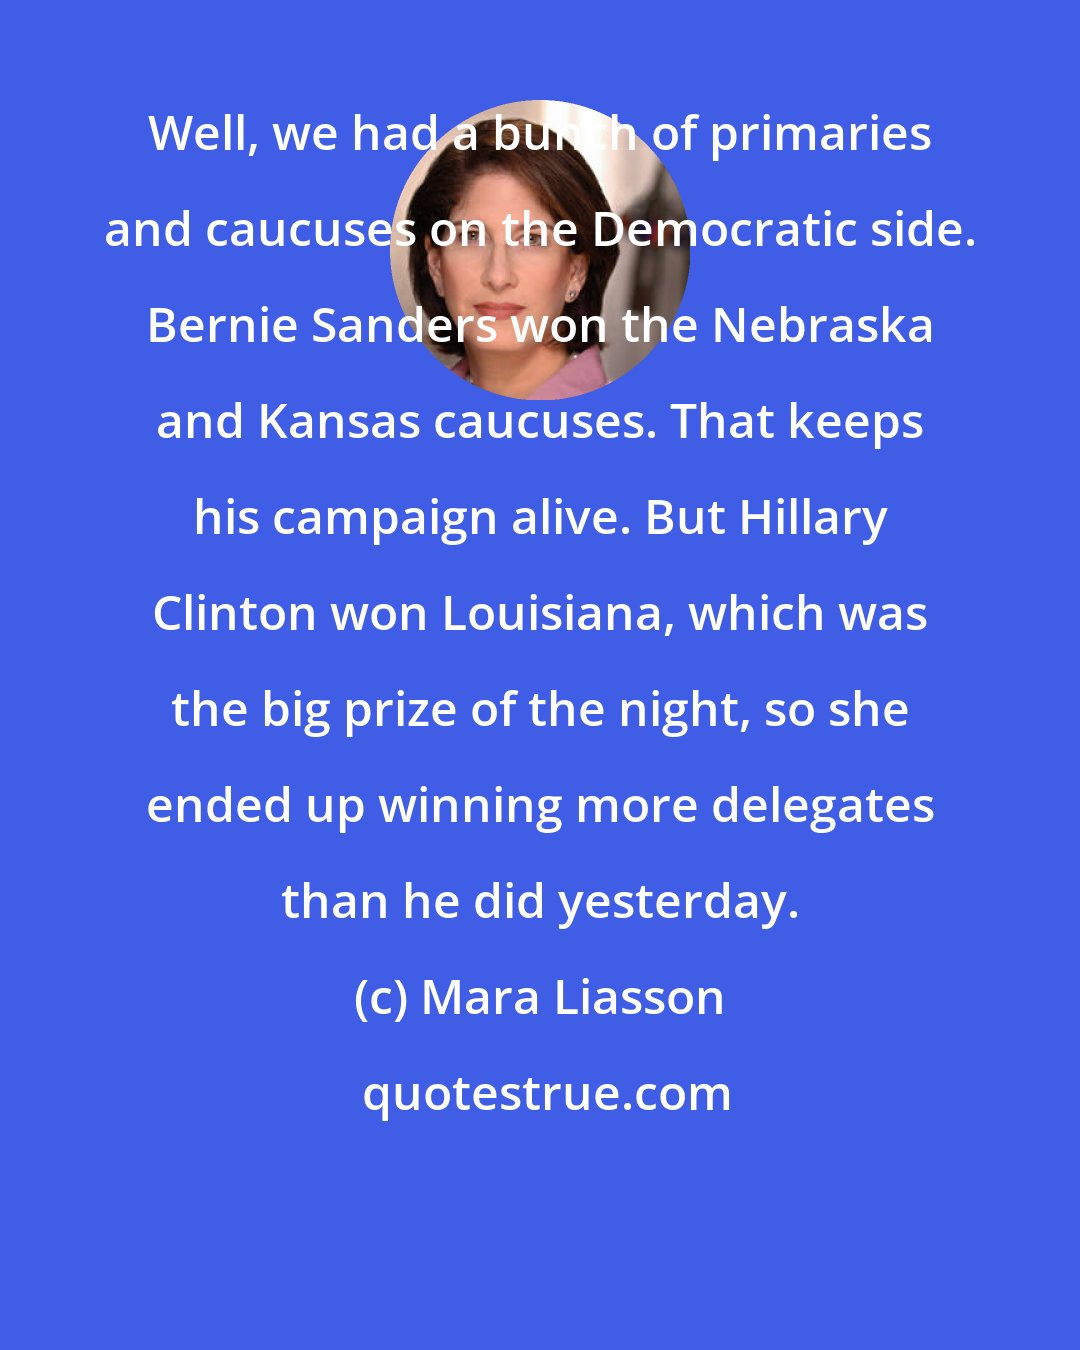 Mara Liasson: Well, we had a bunch of primaries and caucuses on the Democratic side. Bernie Sanders won the Nebraska and Kansas caucuses. That keeps his campaign alive. But Hillary Clinton won Louisiana, which was the big prize of the night, so she ended up winning more delegates than he did yesterday.